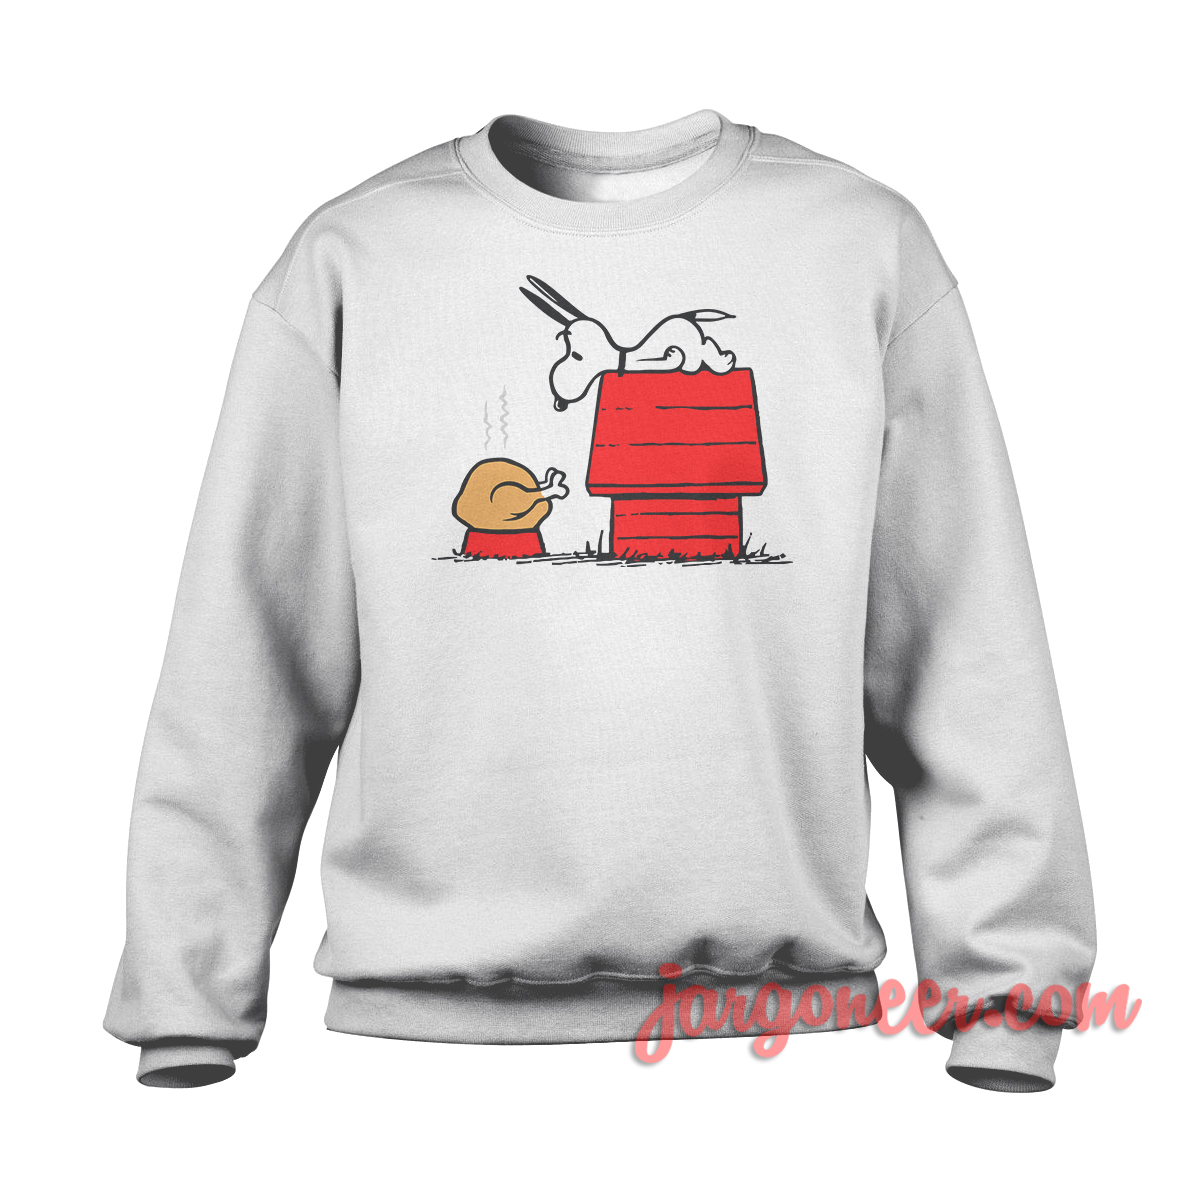 Surprising Turkey For The Funny Dog White SS - Shop Unique Graphic Cool Shirt Designs